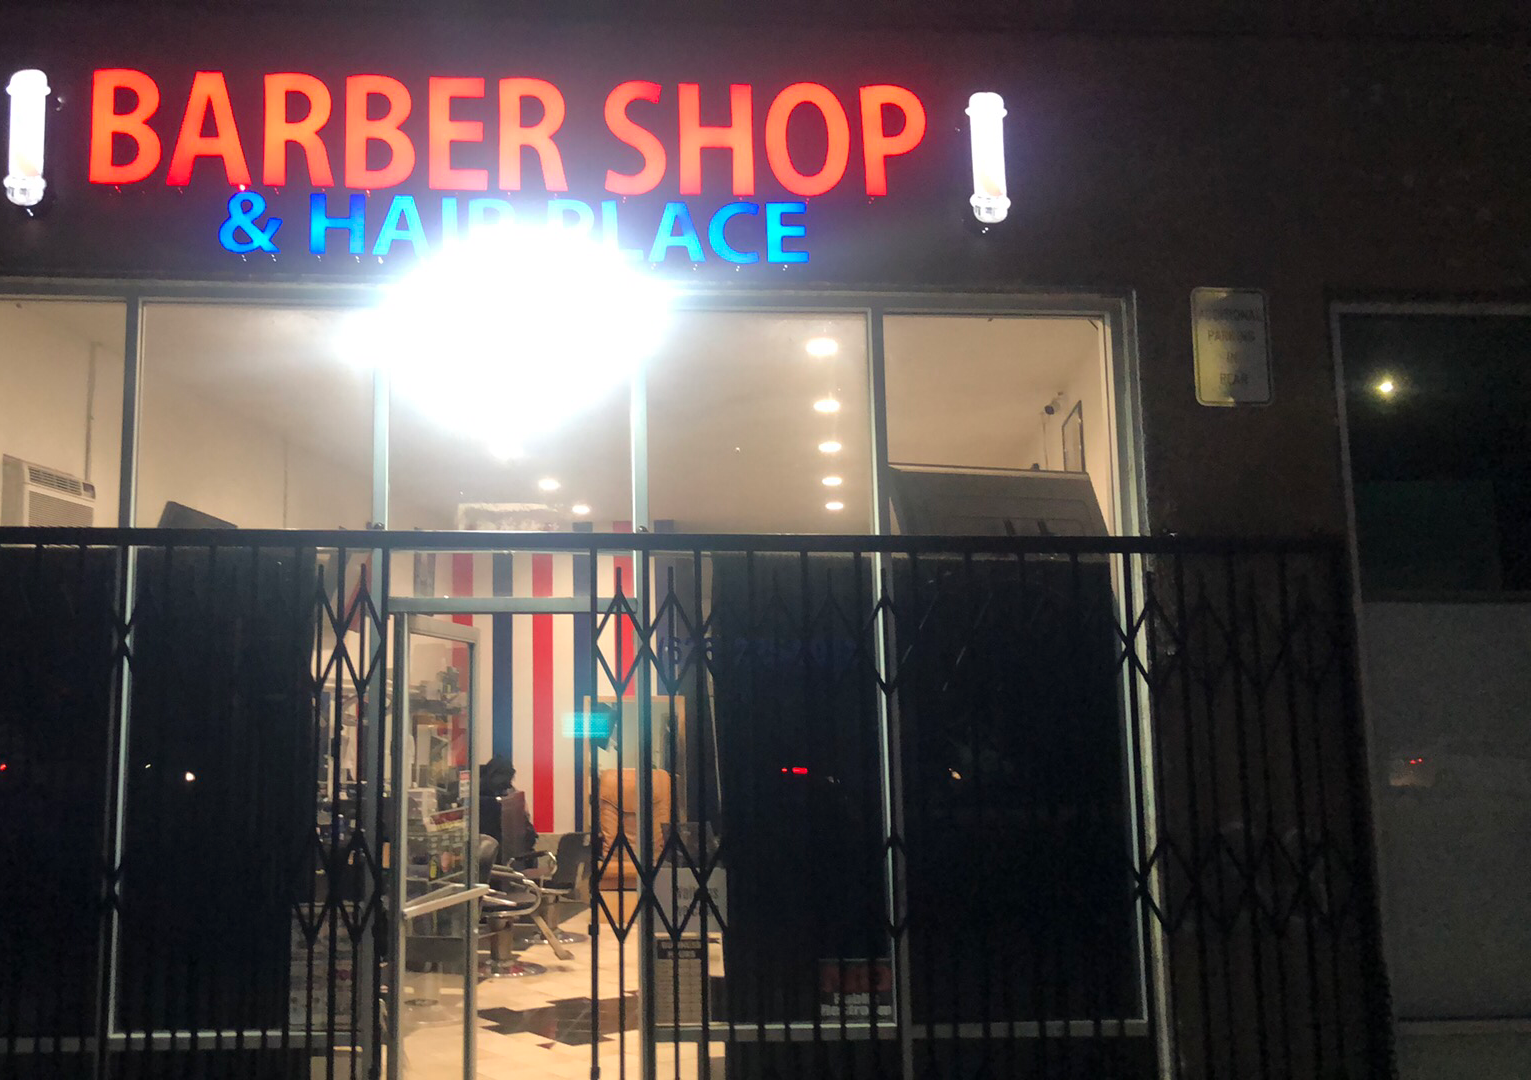 BARBER SHOP & HAIR PLACE